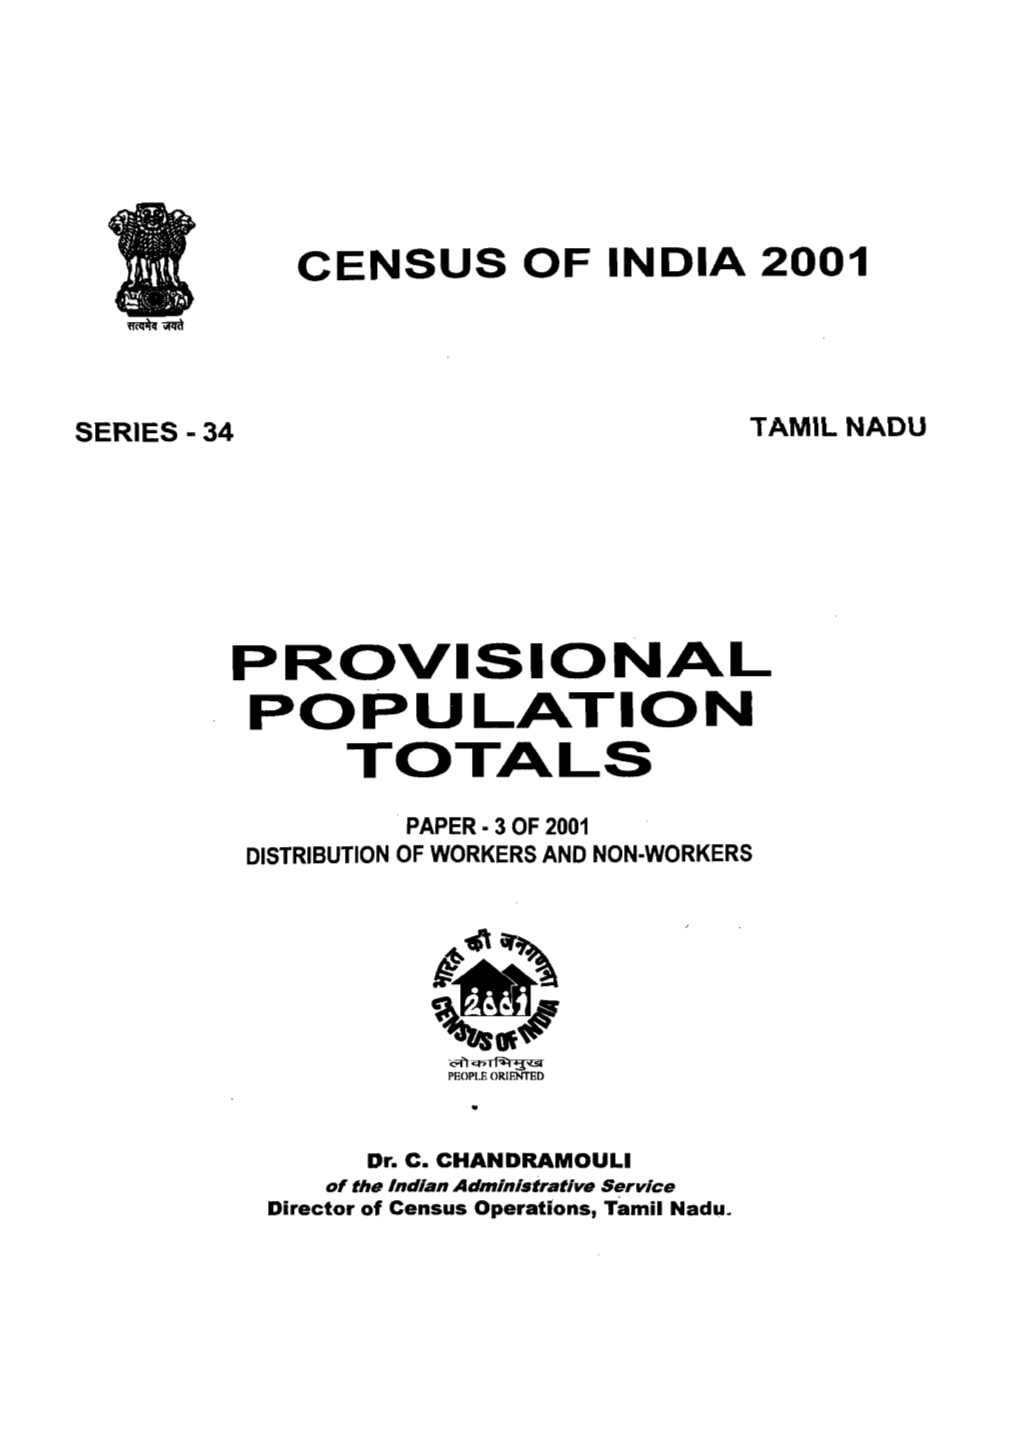 Provisional Population Totals, Series-34